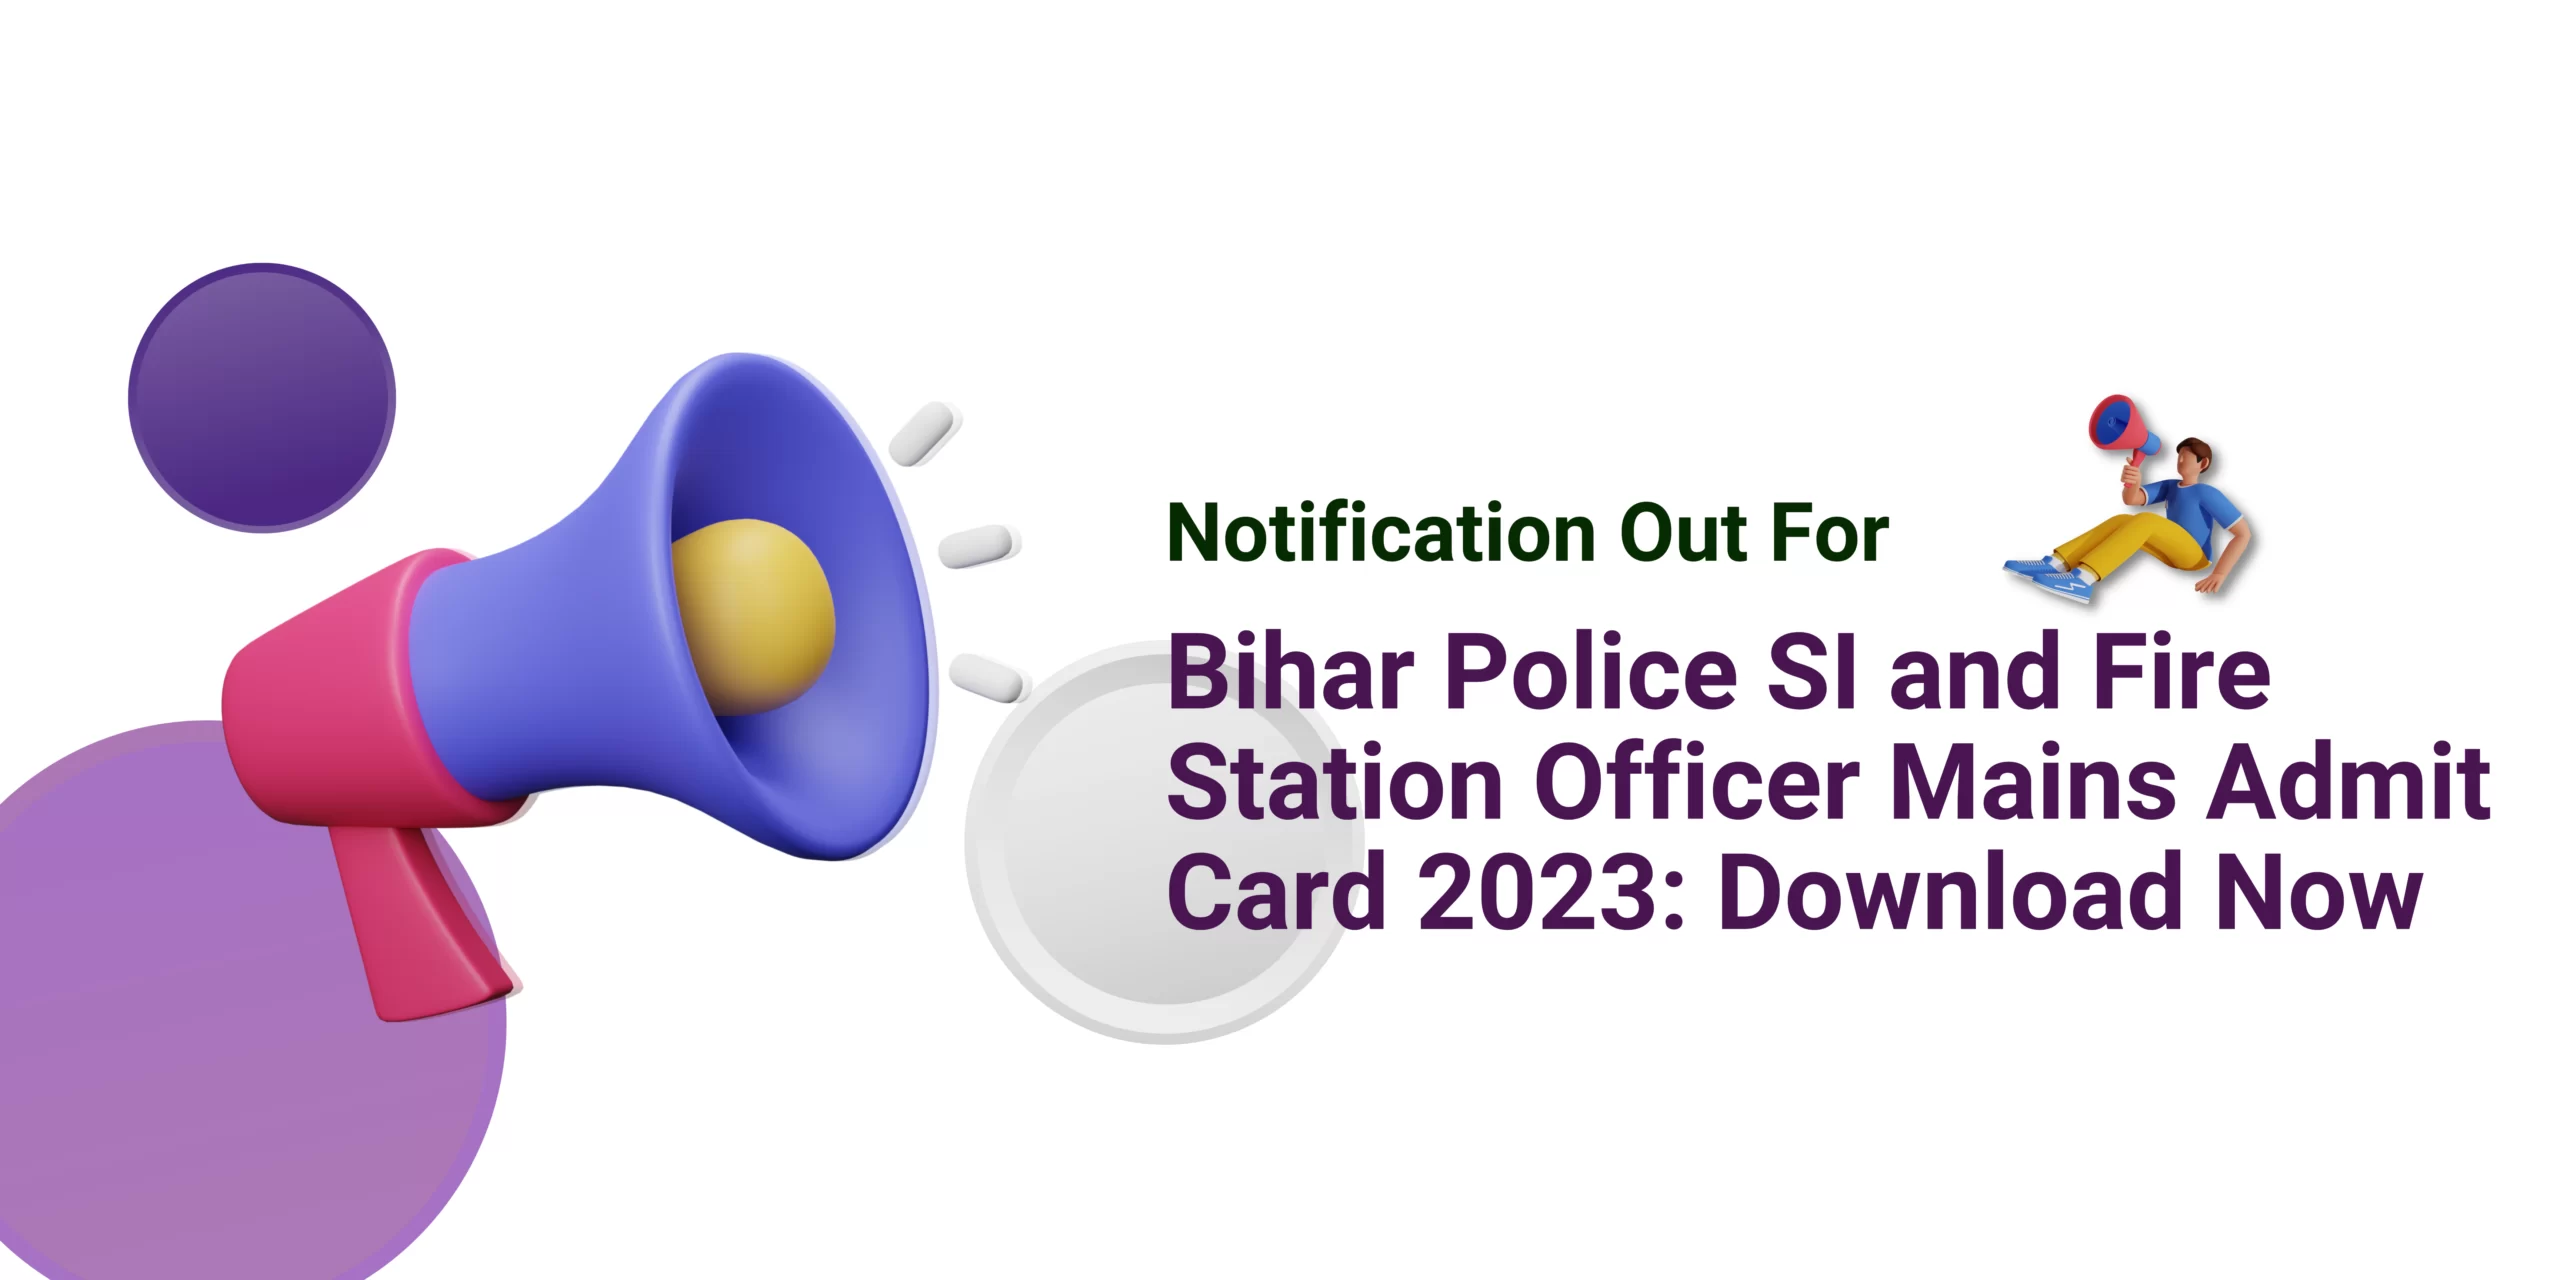 Bihar Police SI and Fire Station Officer Mains Admit Card